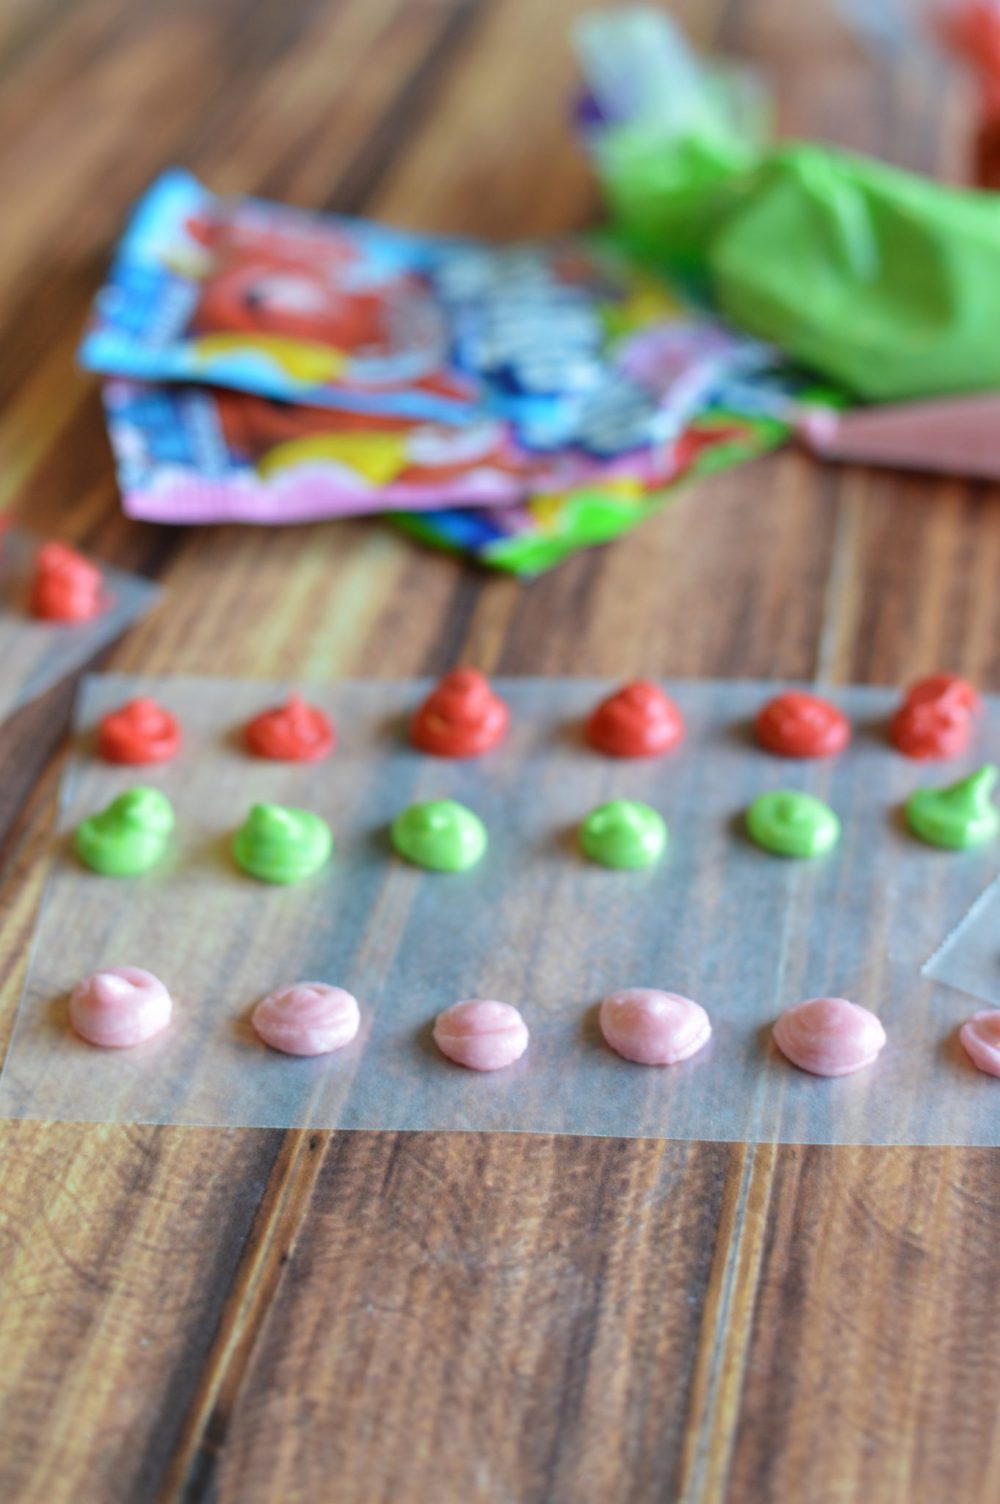 Kid-Friendly Candy DOTS Recipe